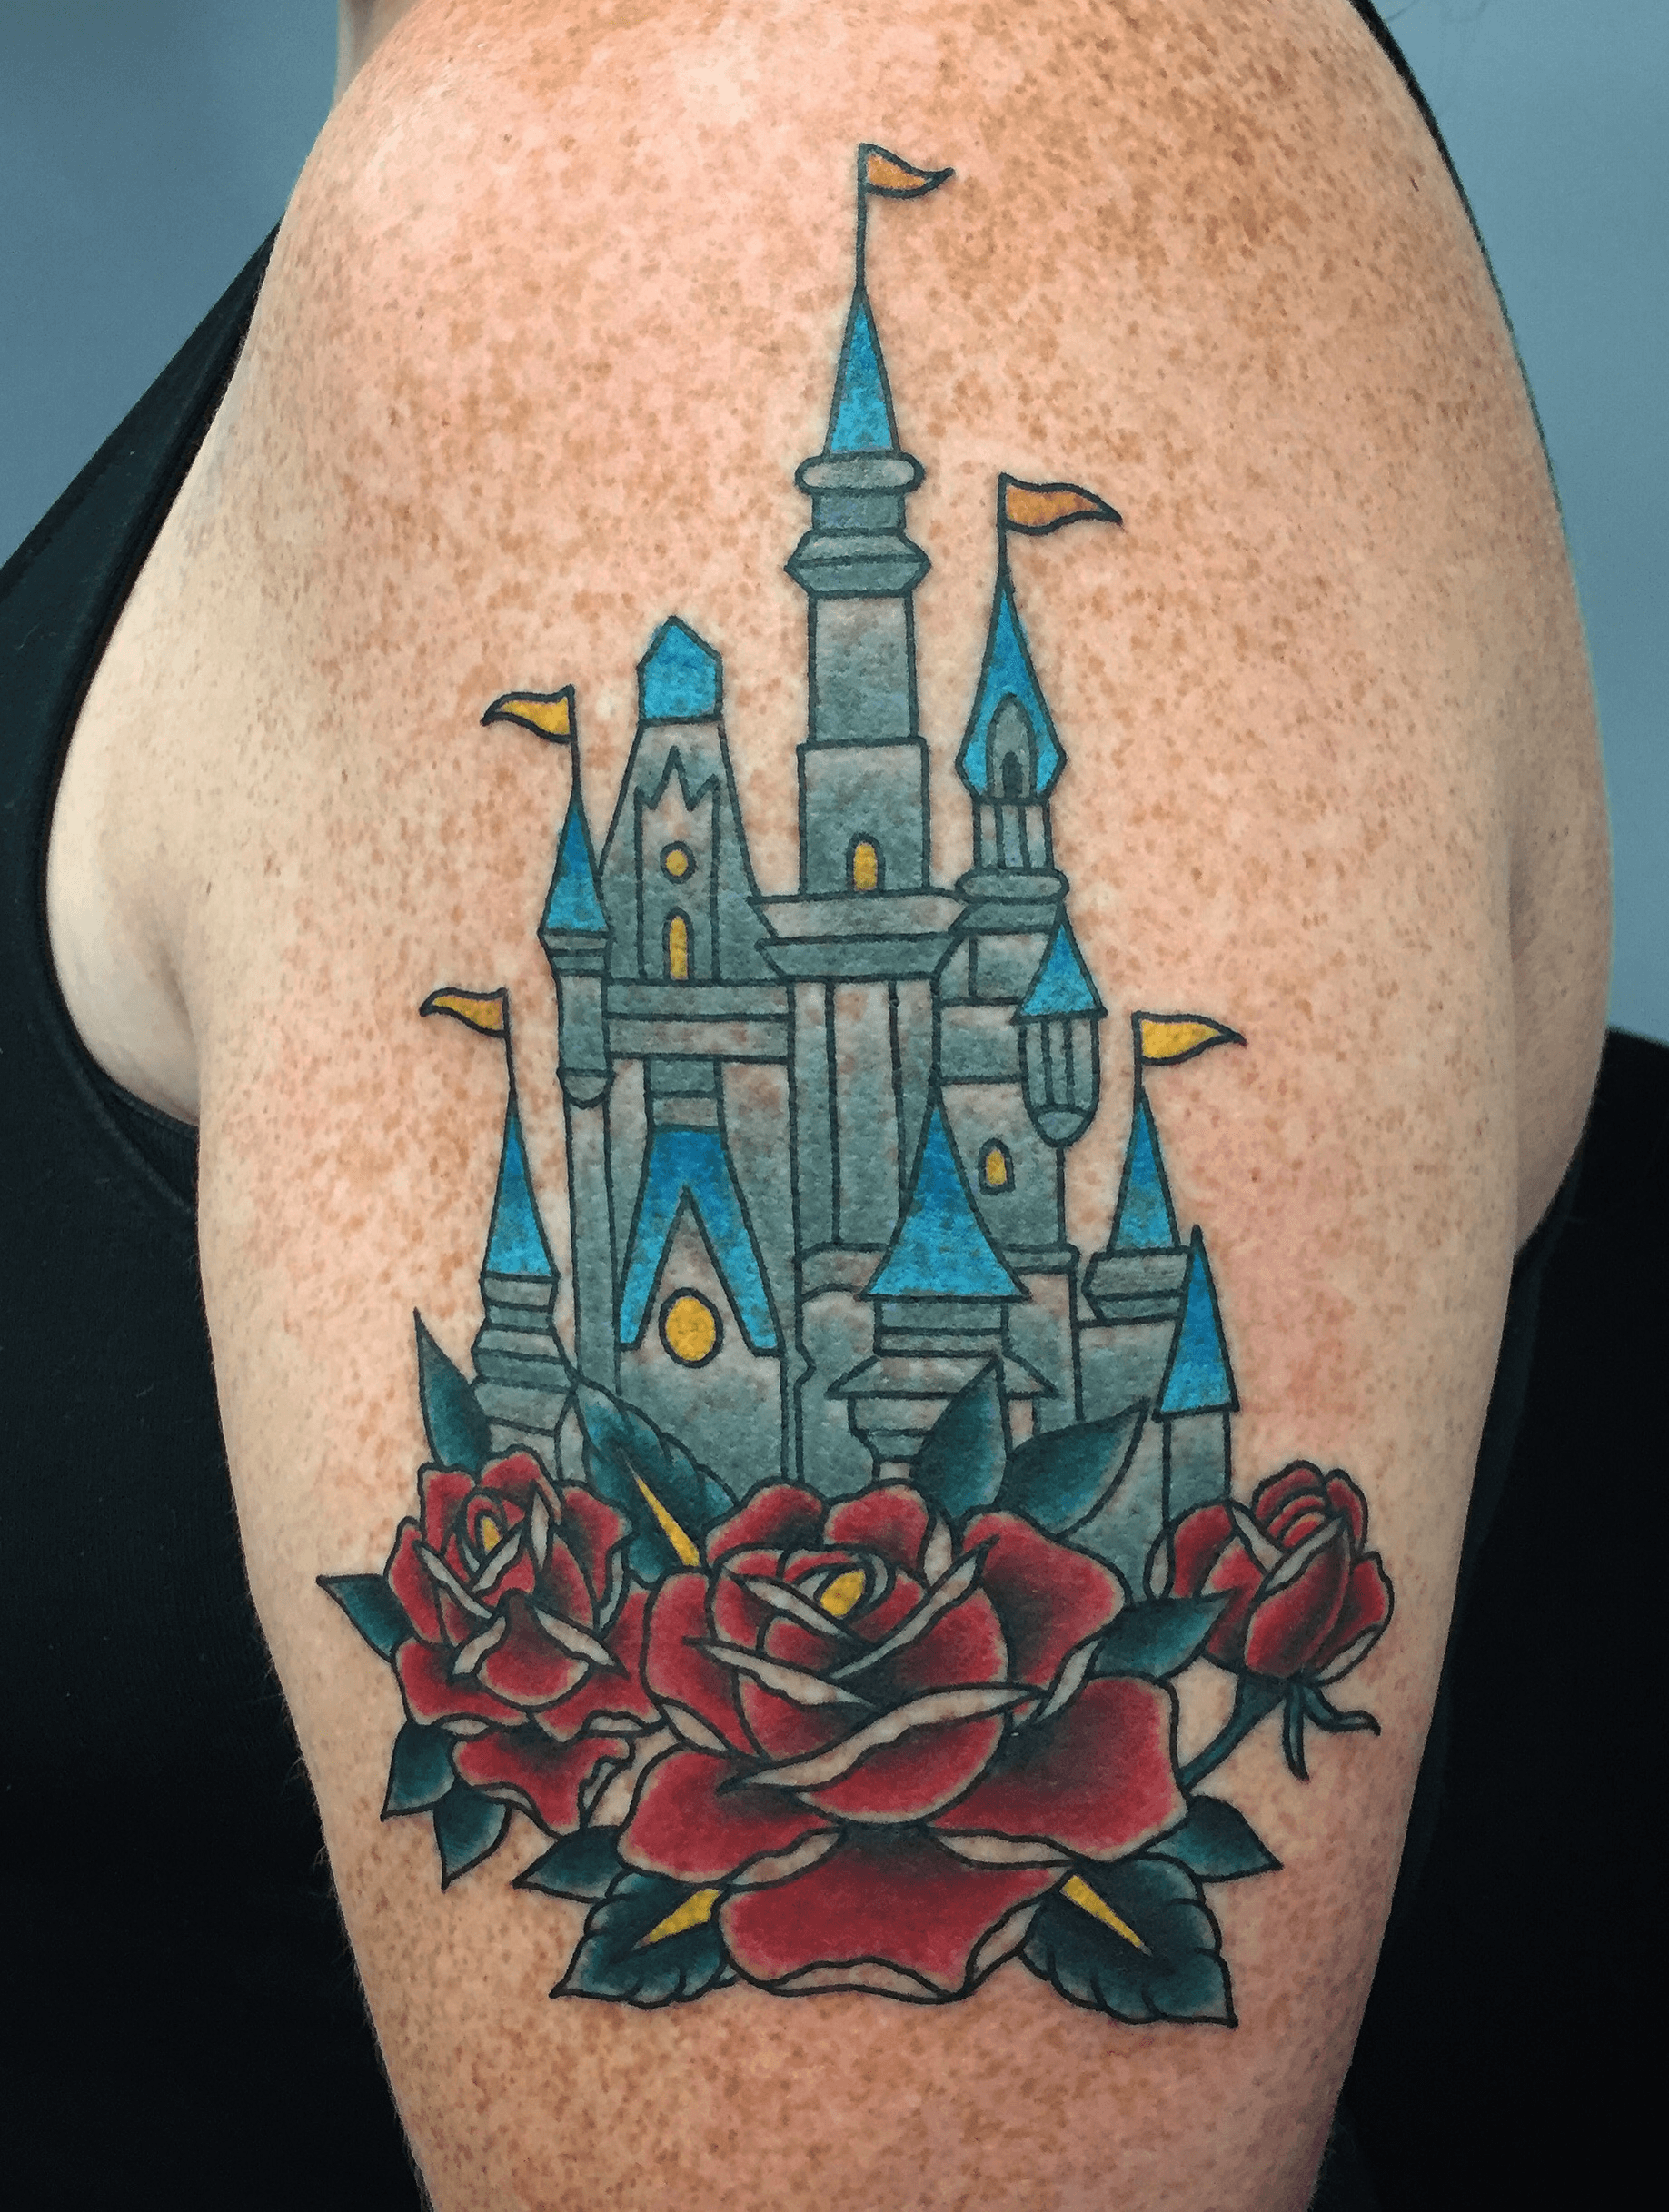 Tattoo tagged with castle small adamsage dotwork black tricep tiny  hand poked little architecture other  inkedappcom